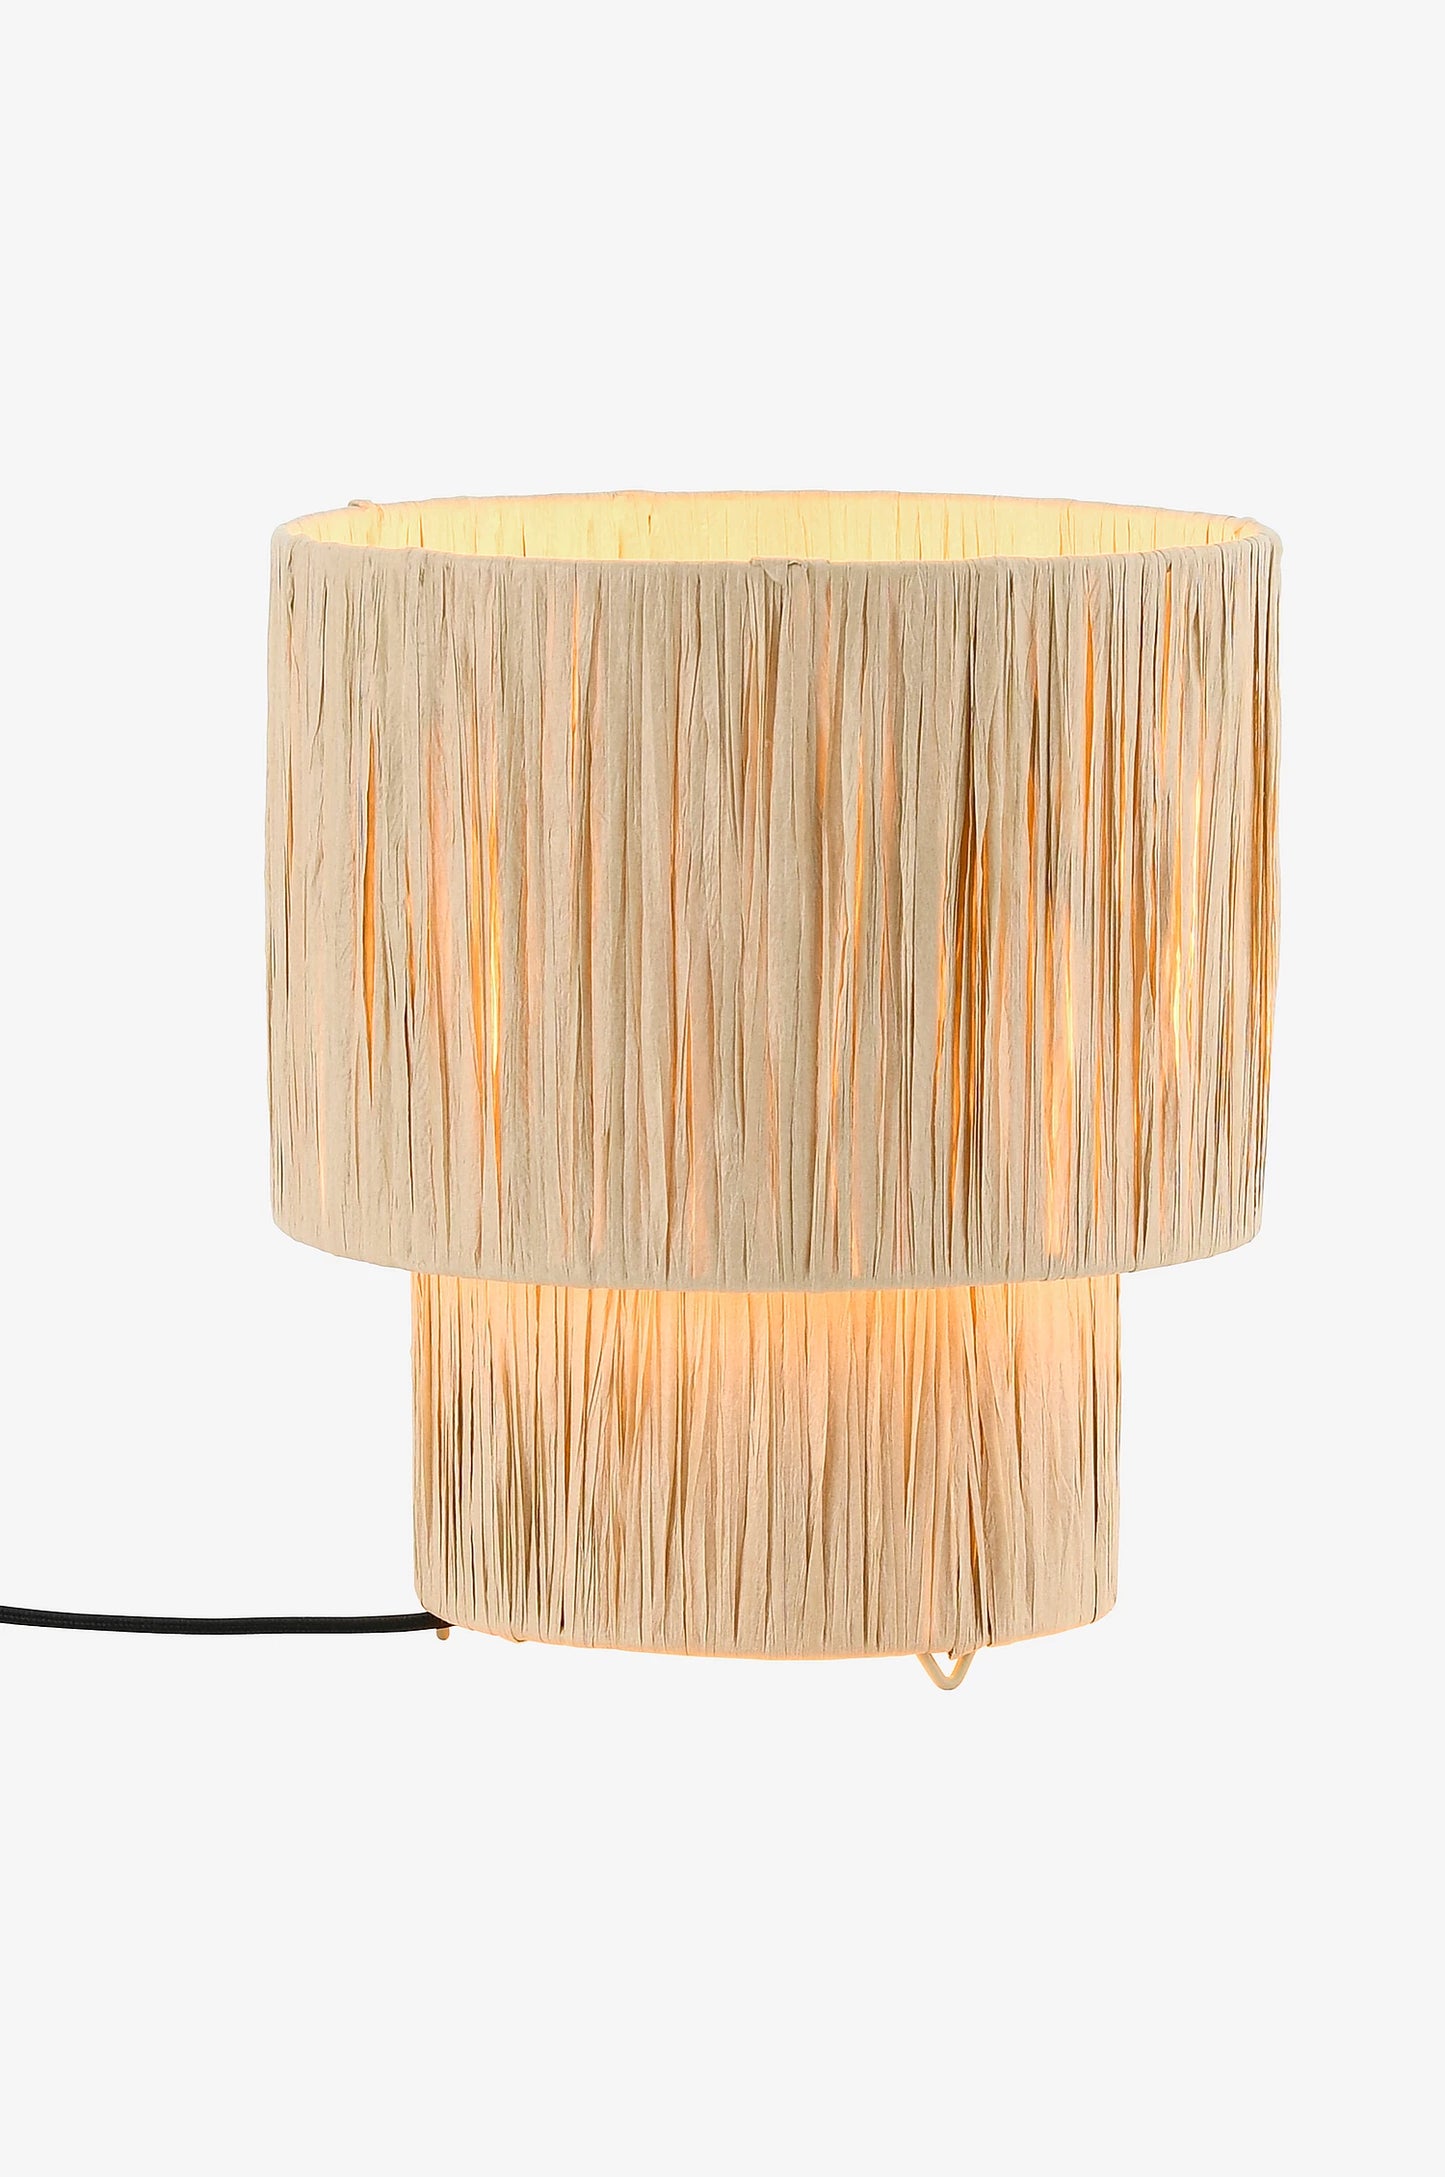 Rattan Table lamp for Living room | Bamboo Bedside table lamp | Cane Table lamp -Tanya - Akway